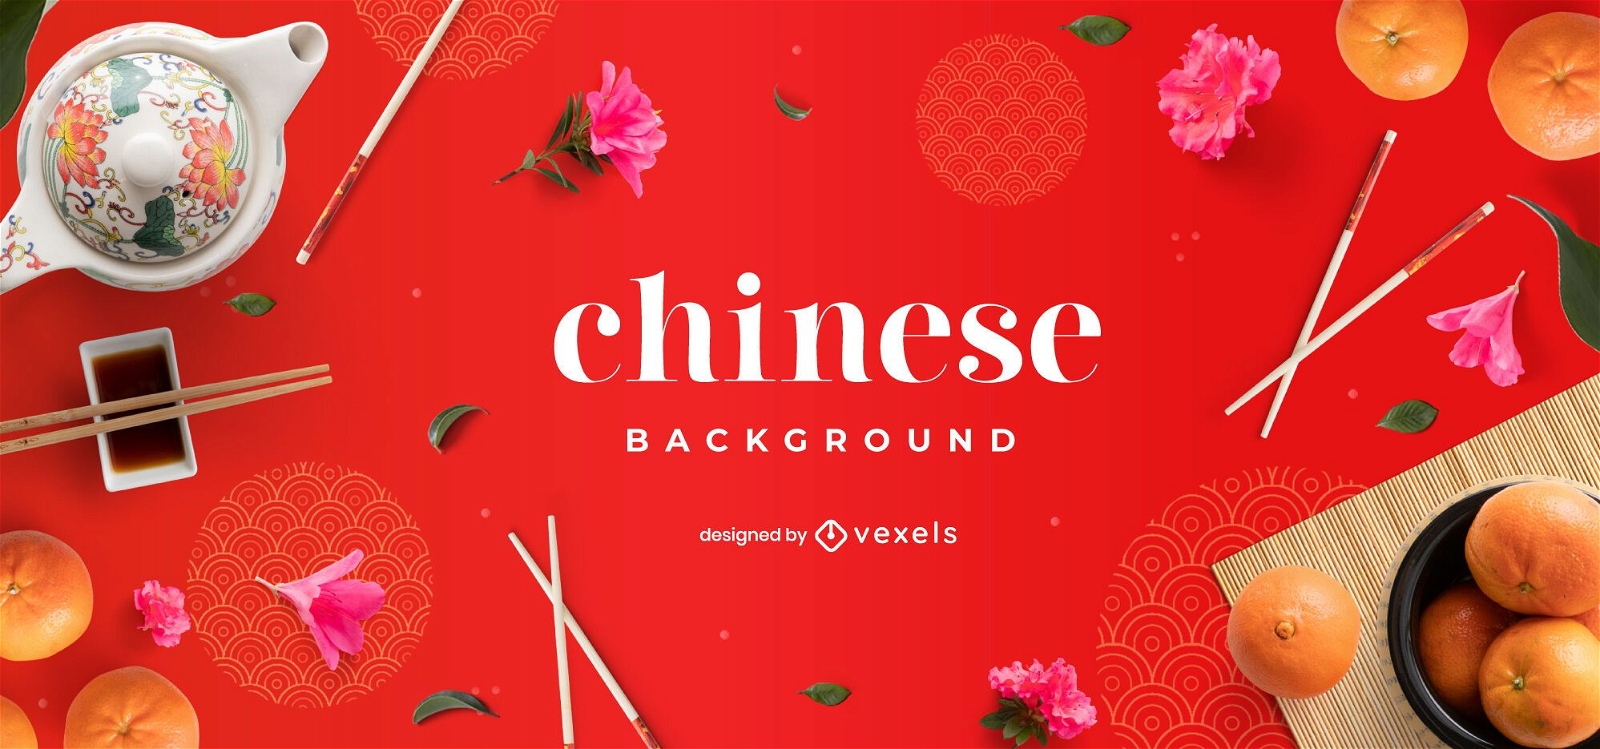 Chinese food background design